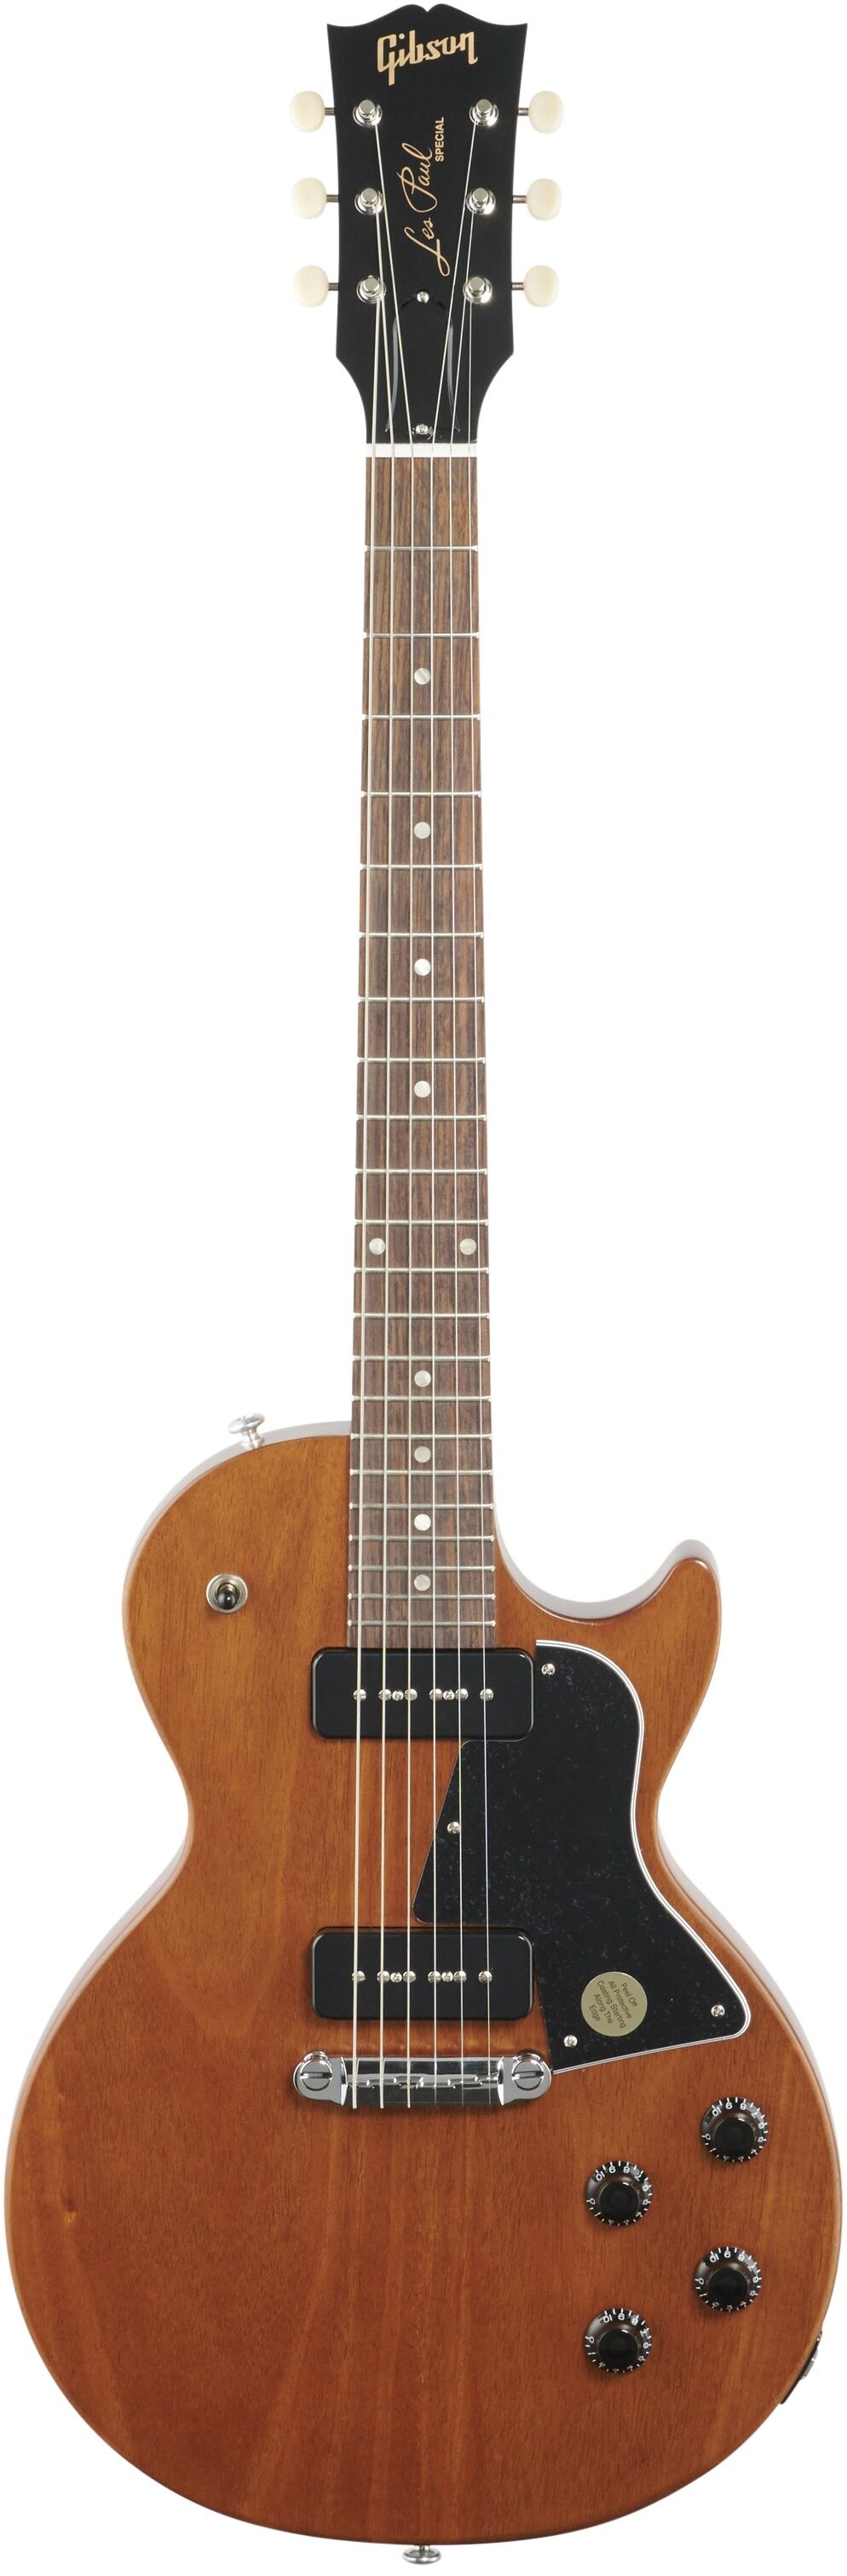 Gibson Les Paul Special Tribute P-90 Electric Guitar (with Gig Bag), Natural Walnut, Full Straight Front